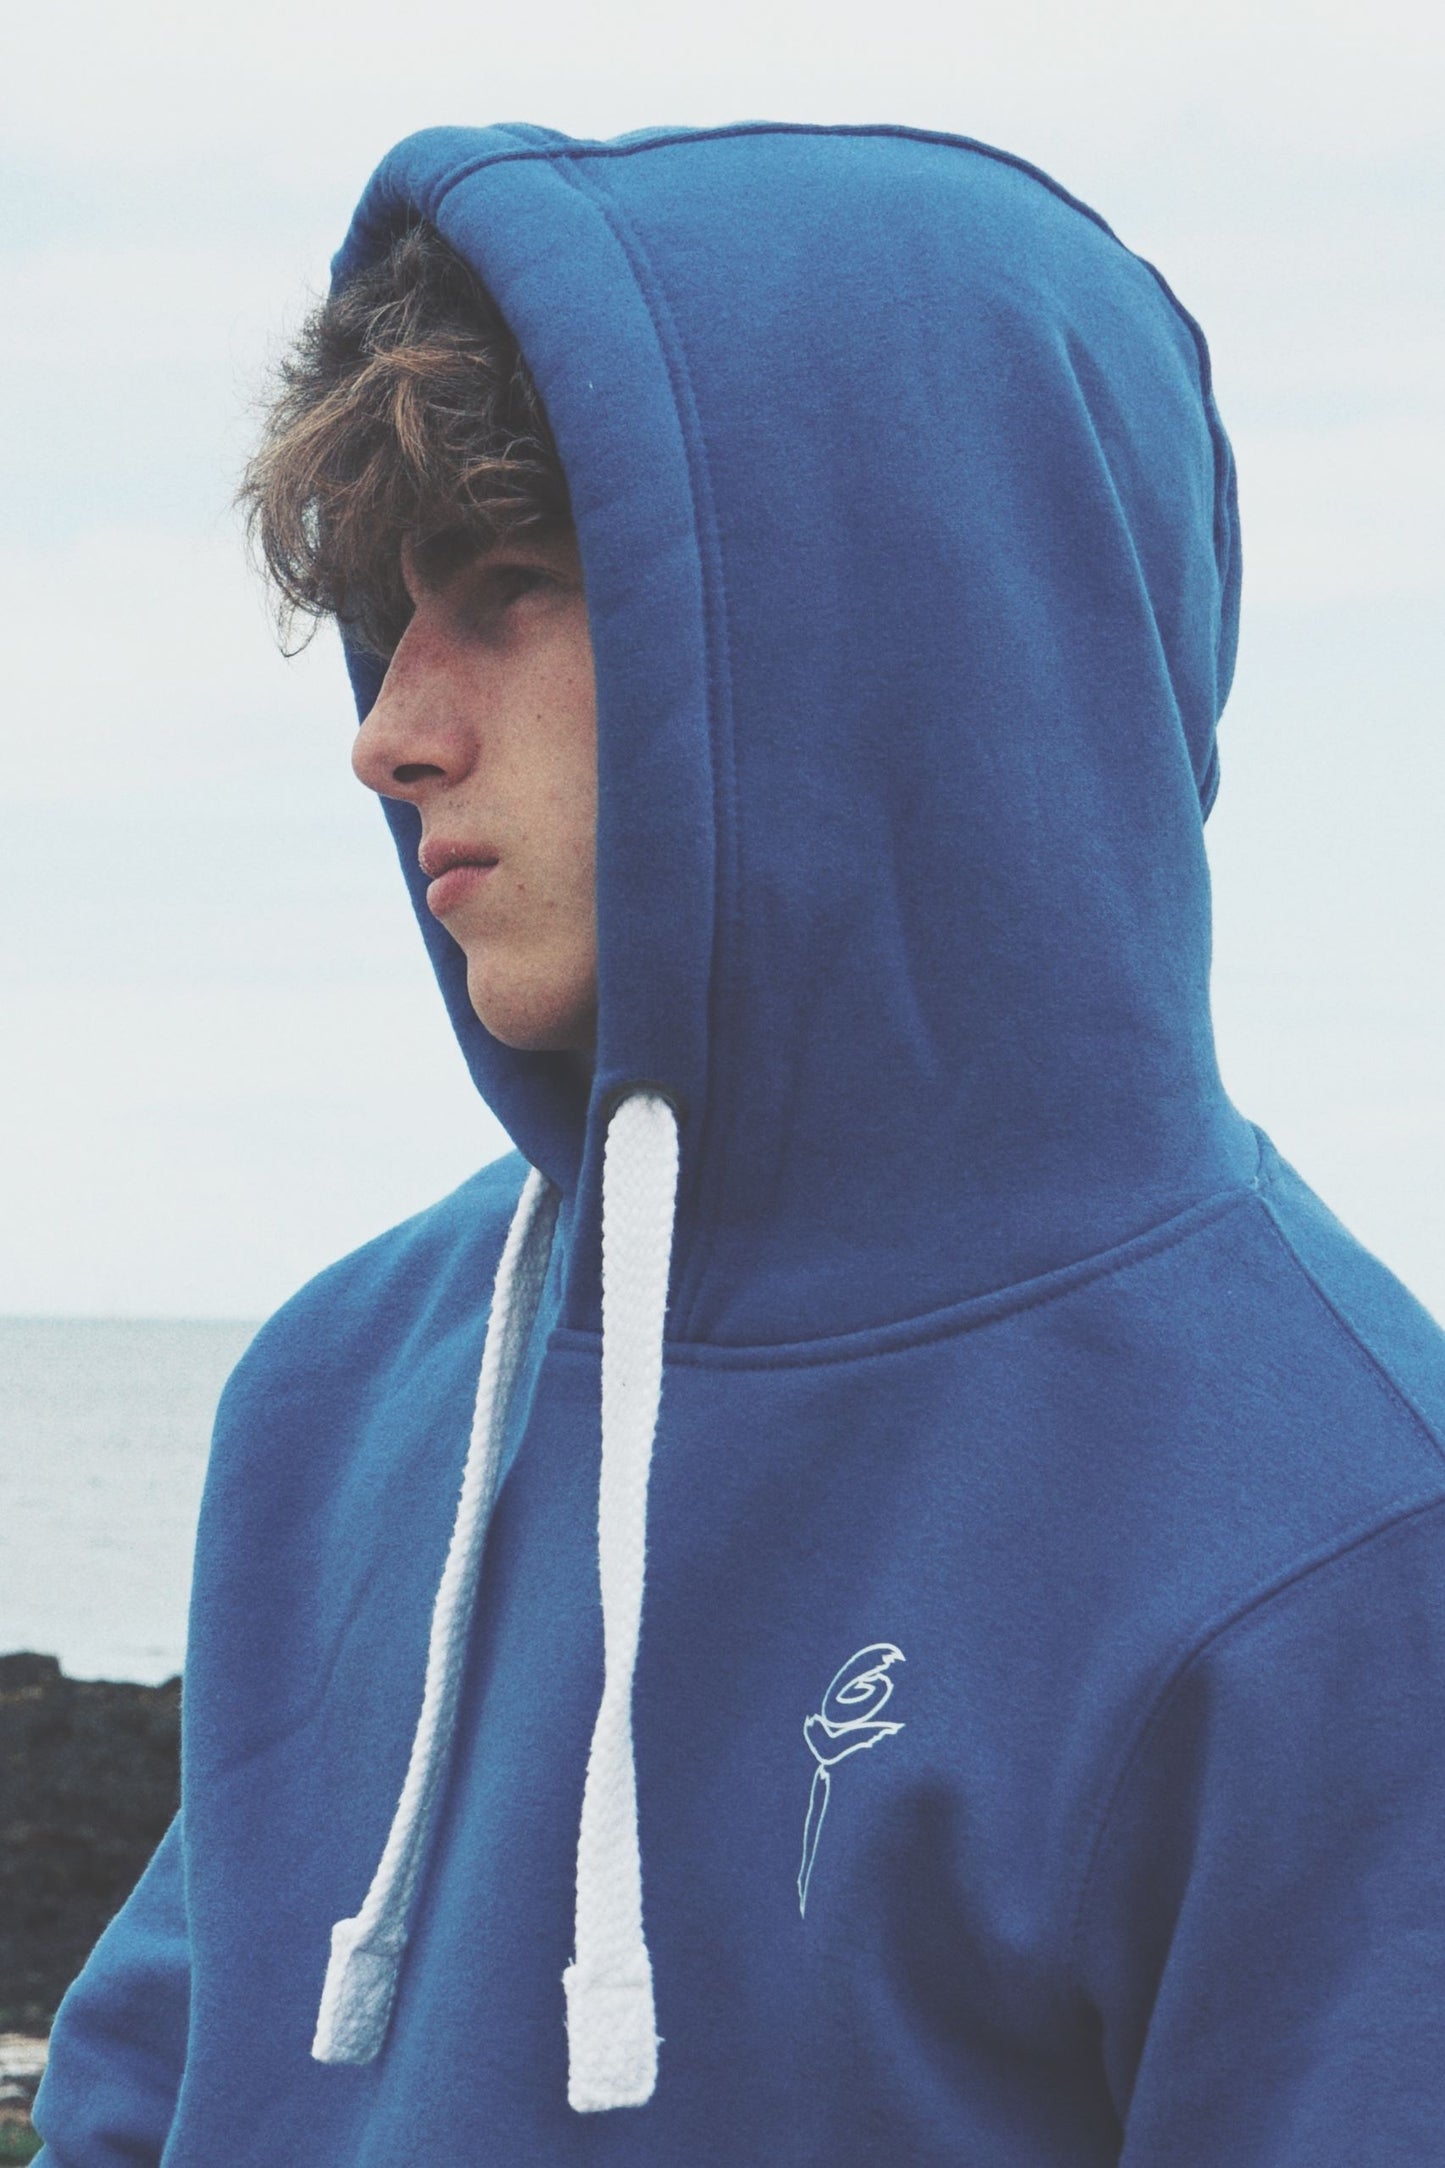 The Blue One's - Ultra Premium, Super Soft, Heavy Weight Hoodie